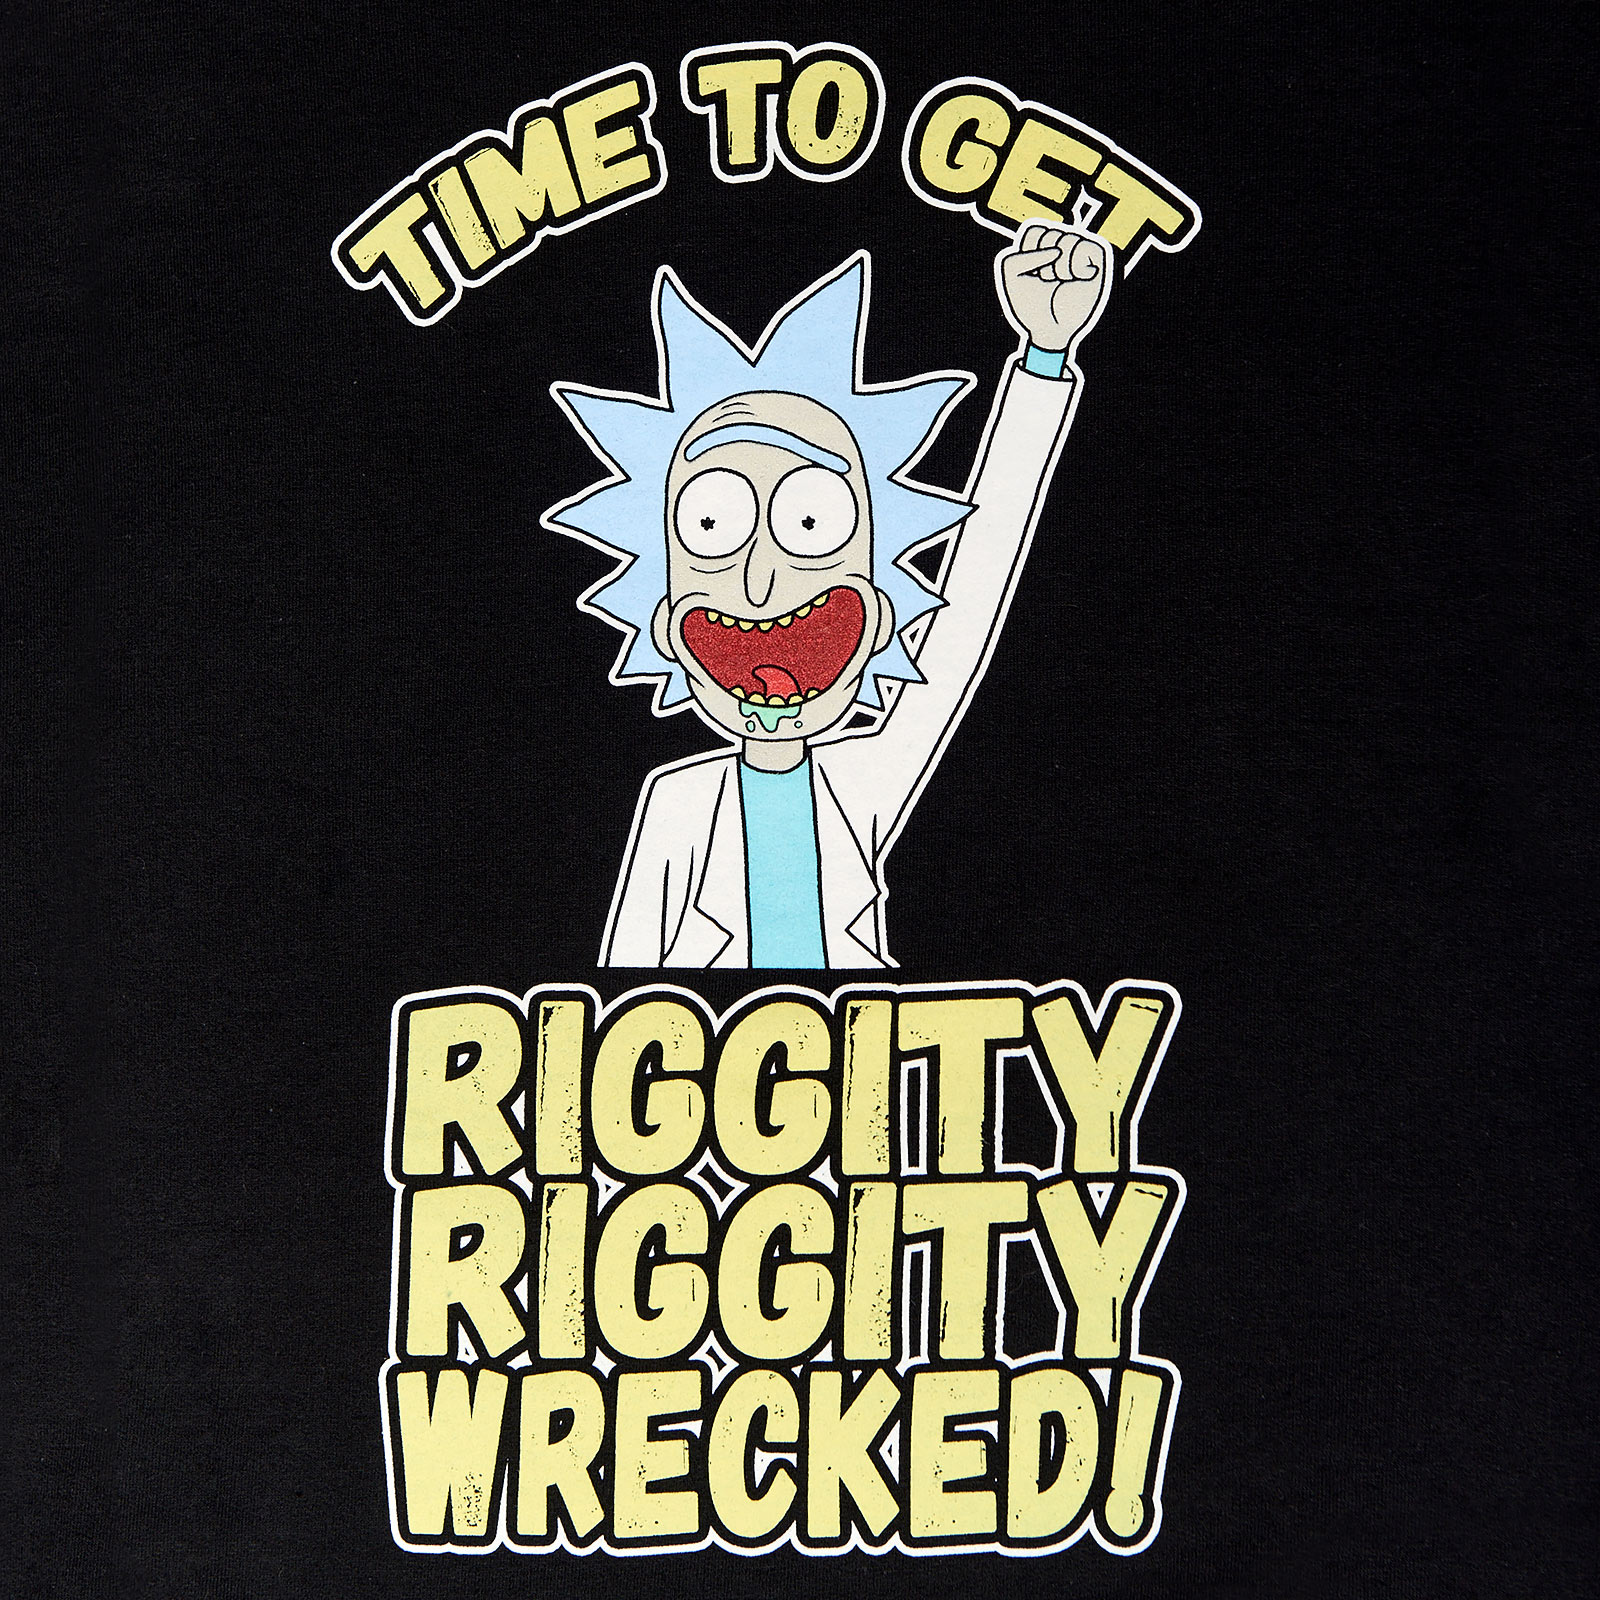 Rick and Morty - Riggity Wrecked Sweater schwarz